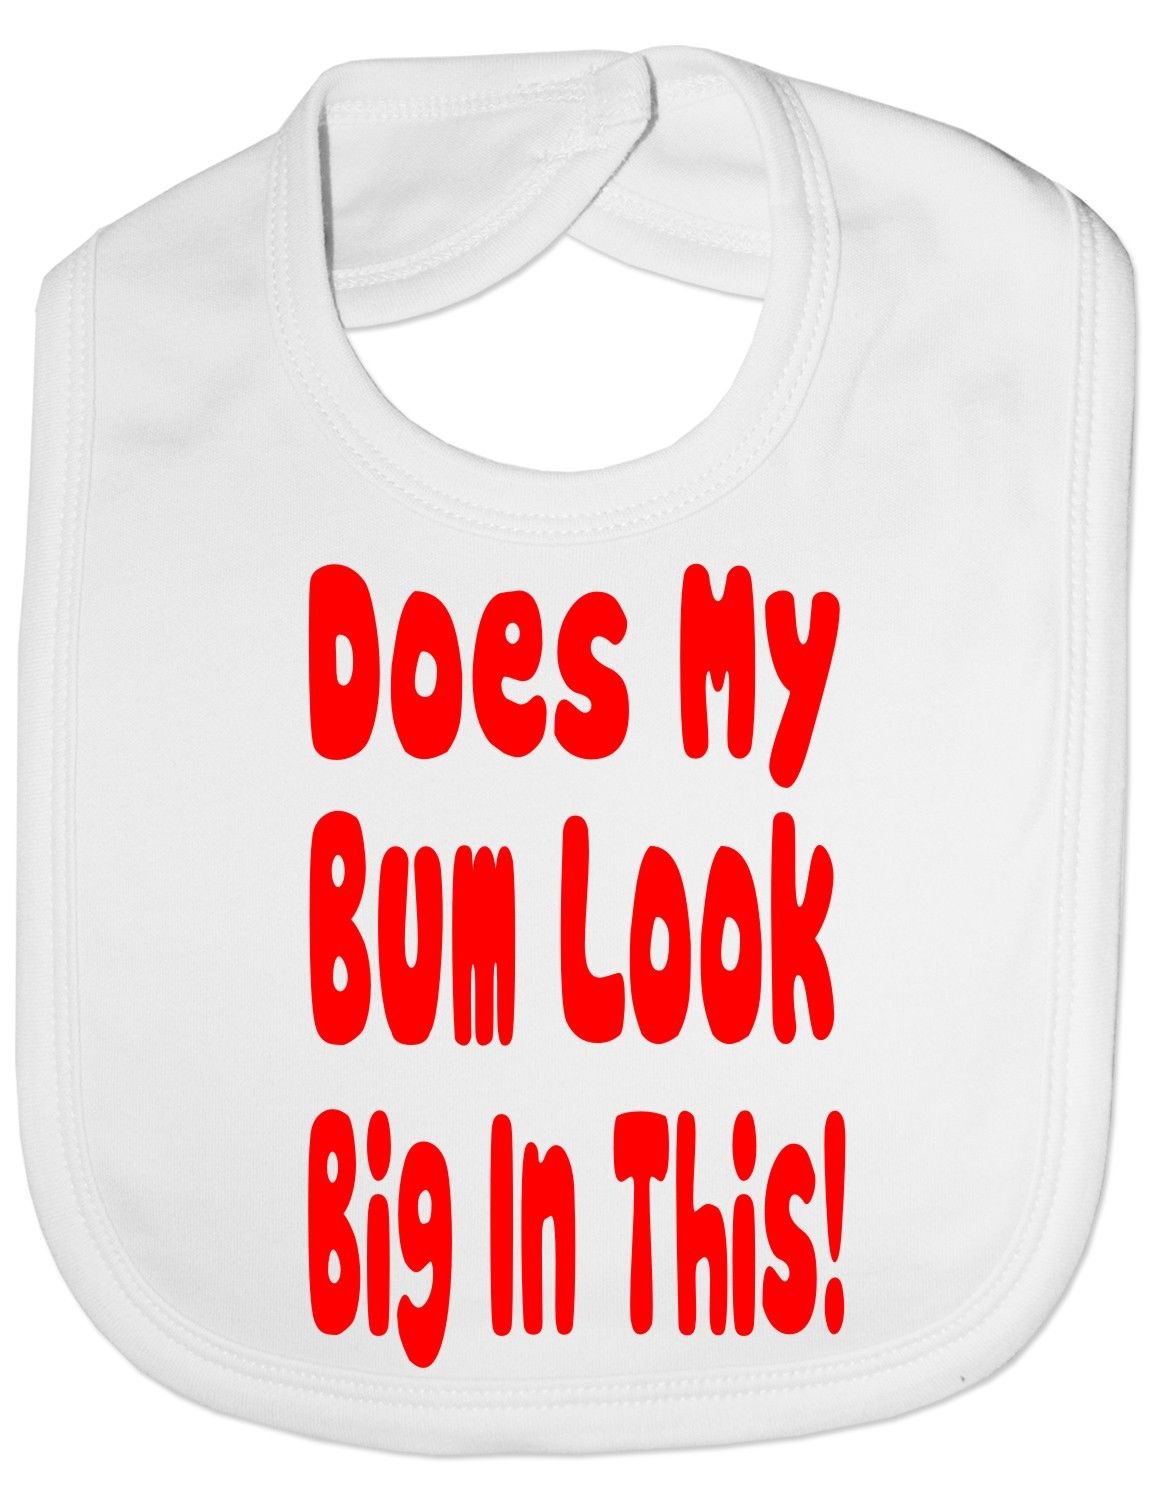 Does My Bum Look Big In This Baby Bib